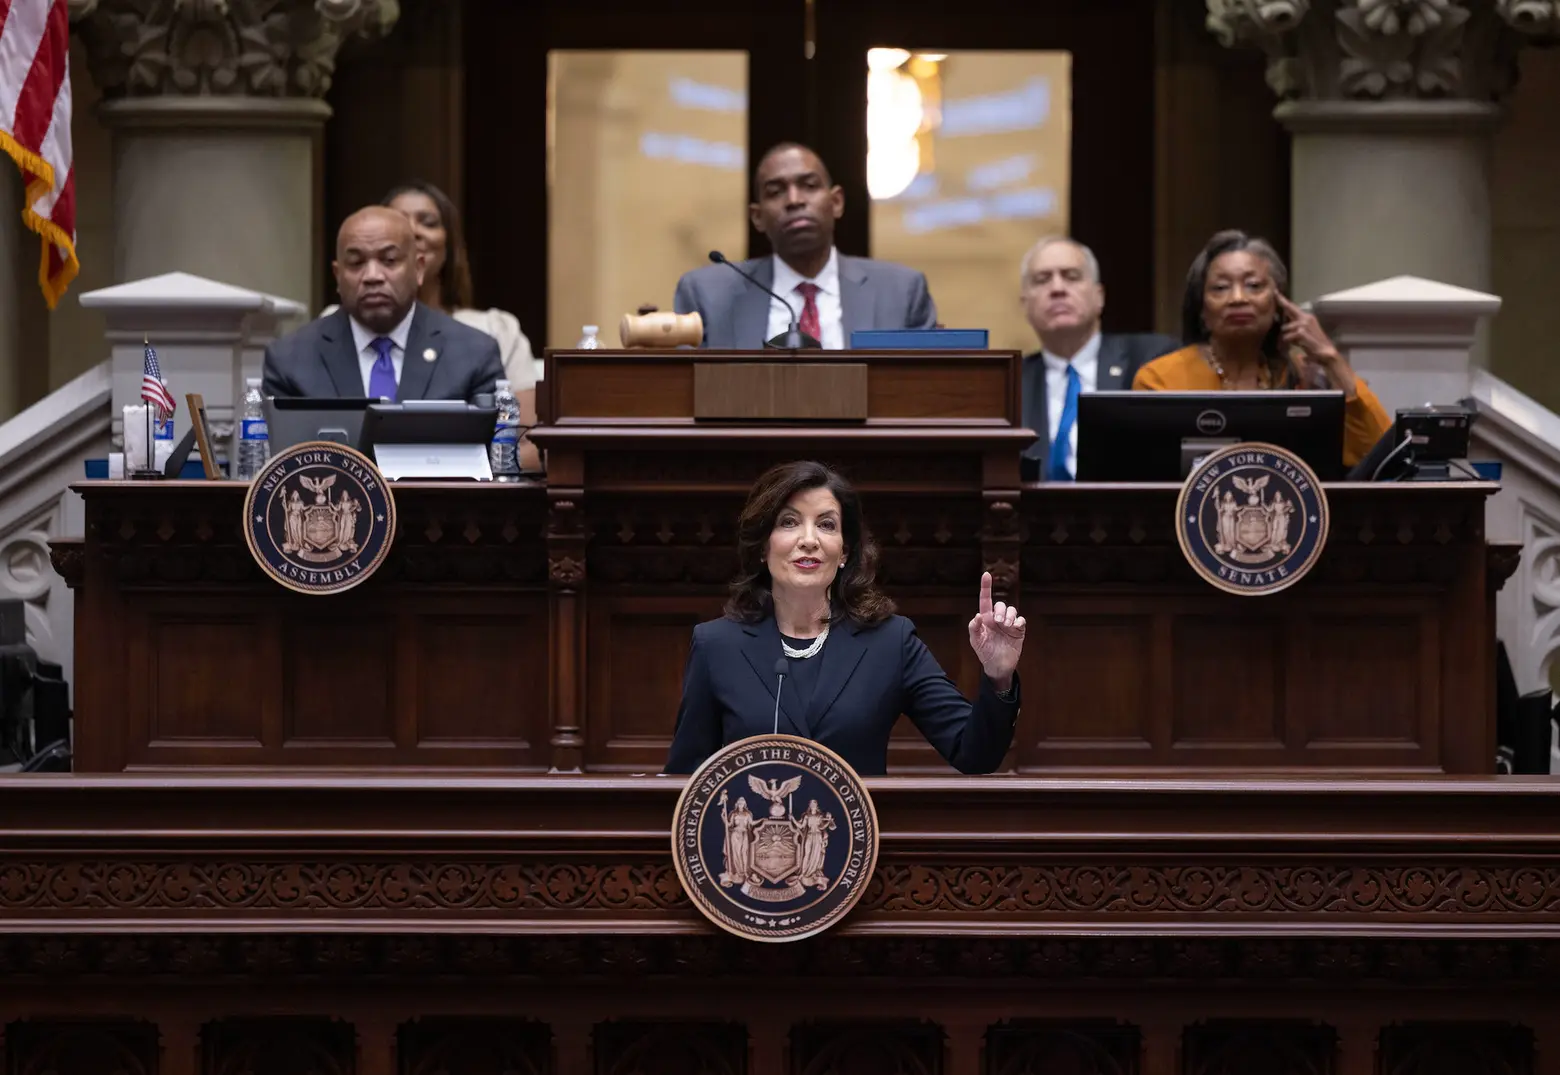 Hochul proposes new housing targets for every locality in New York